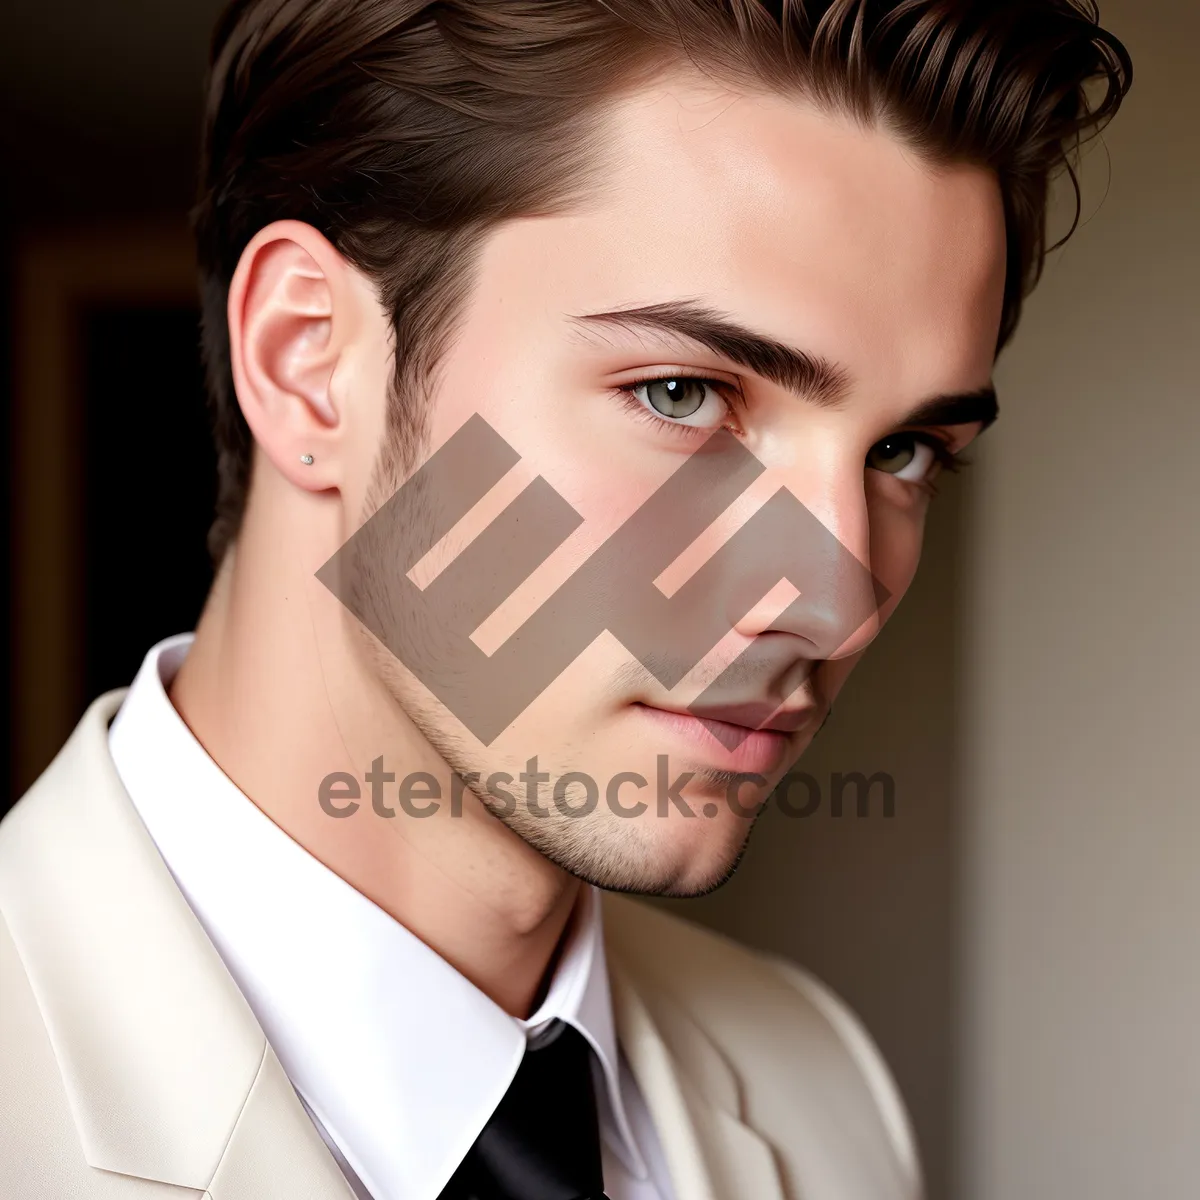 Picture of Smiling Professional Secretary with Attractive Fashionable Haircut